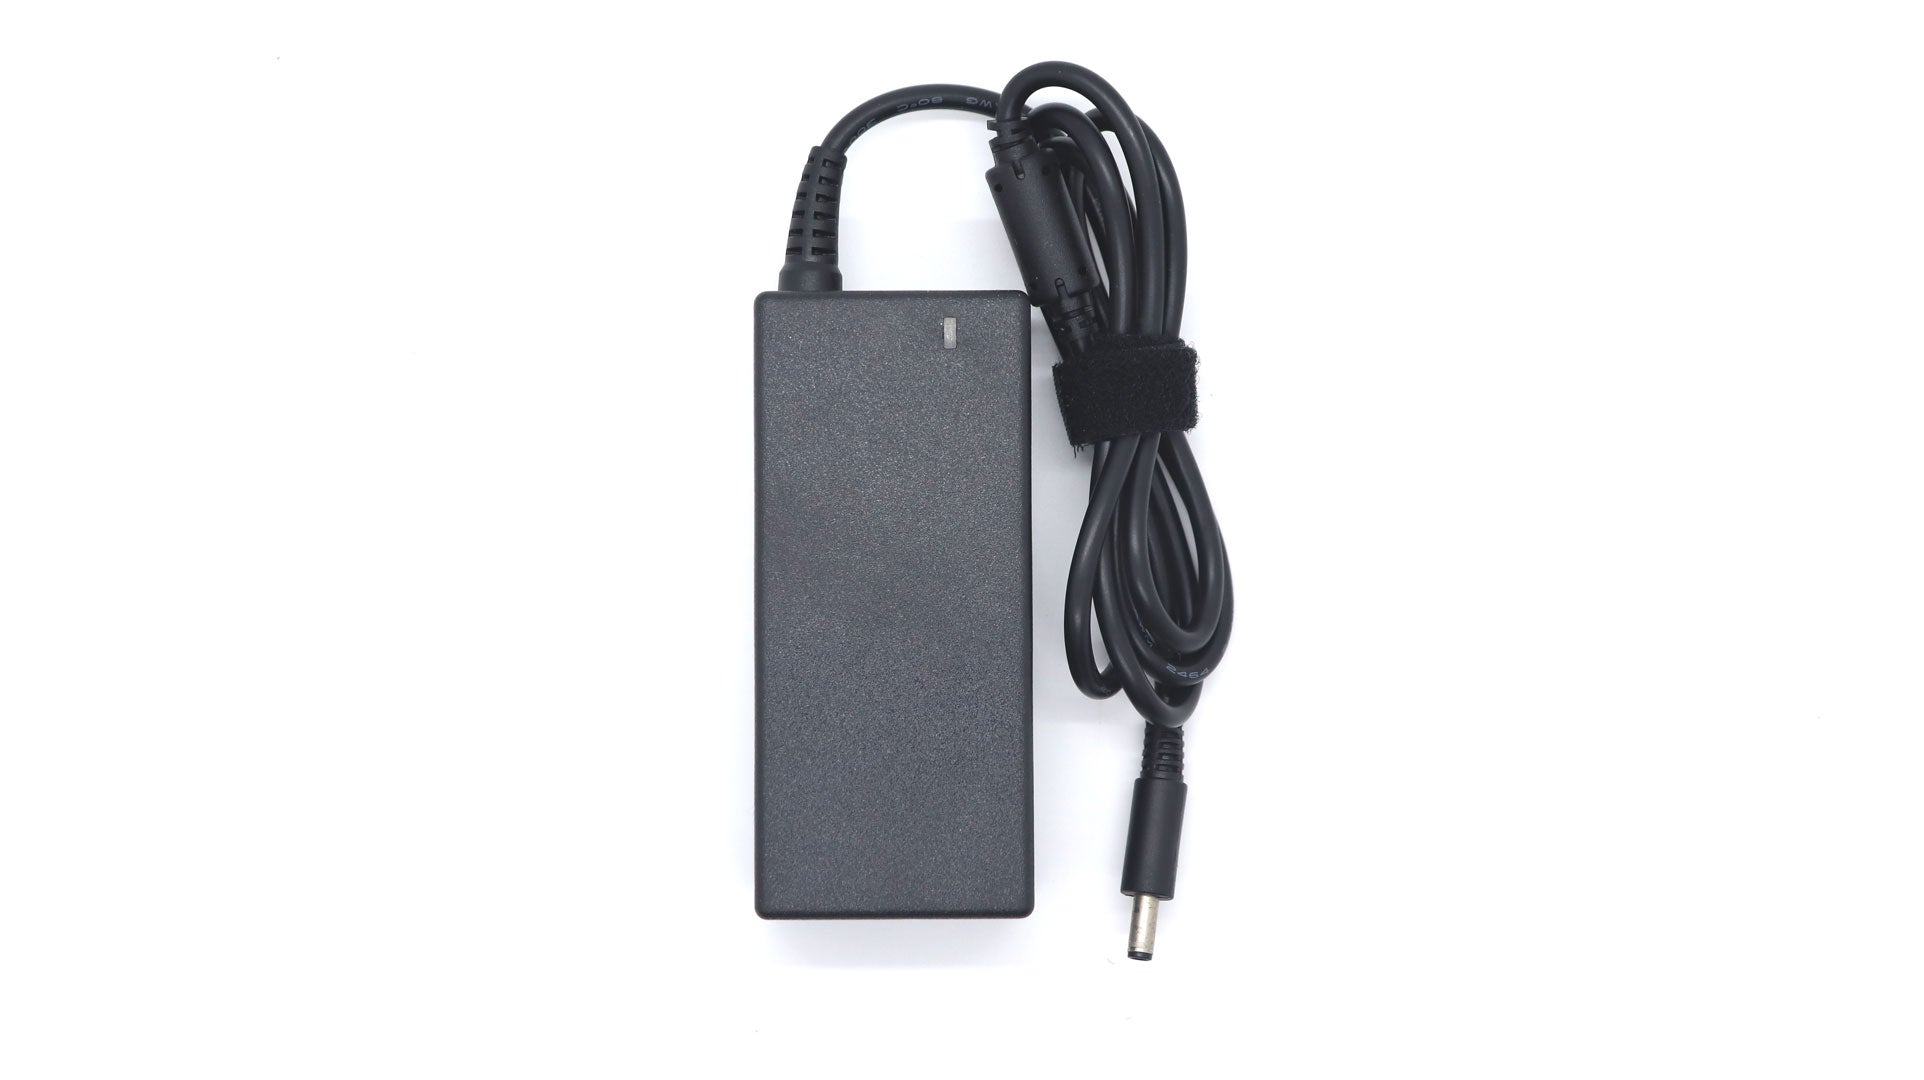 Dell Original 65W 19.5V/3.34Amp 4.5mm Pin Laptop Charger Adapter for Inspiron 14 5480